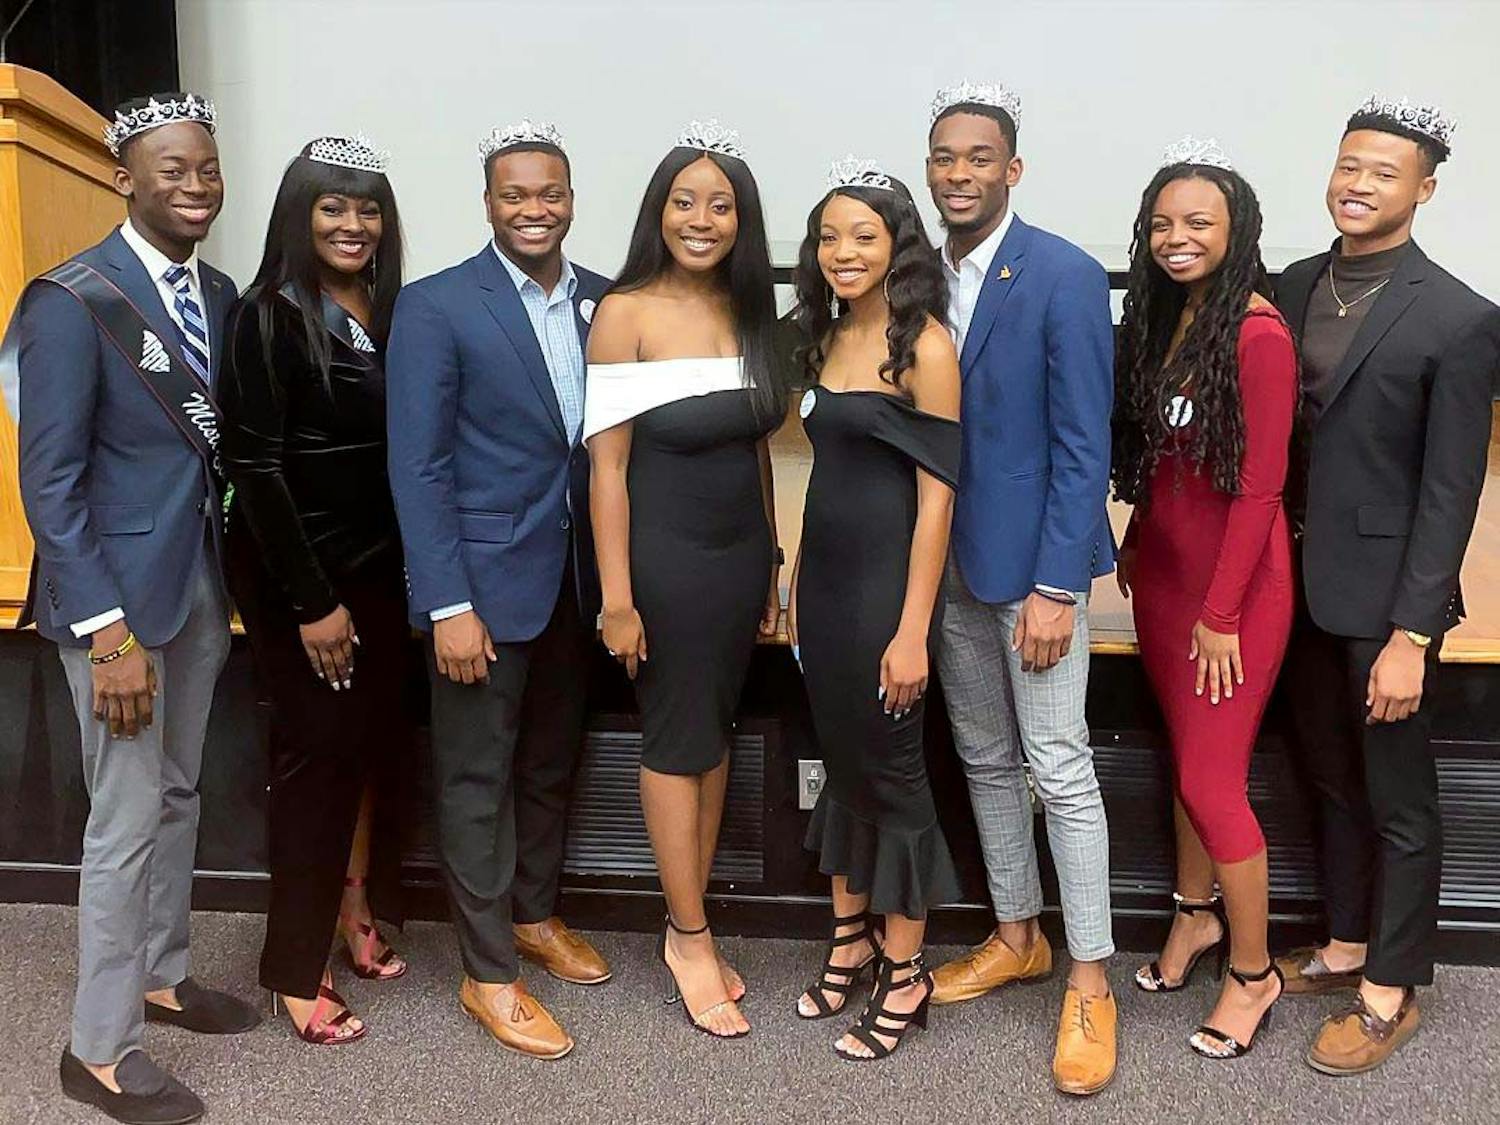 The 2019-2020 Mister and Miss Black USC winners showing off their crowns. This year's pageant will be the first one held on Oct. 26.